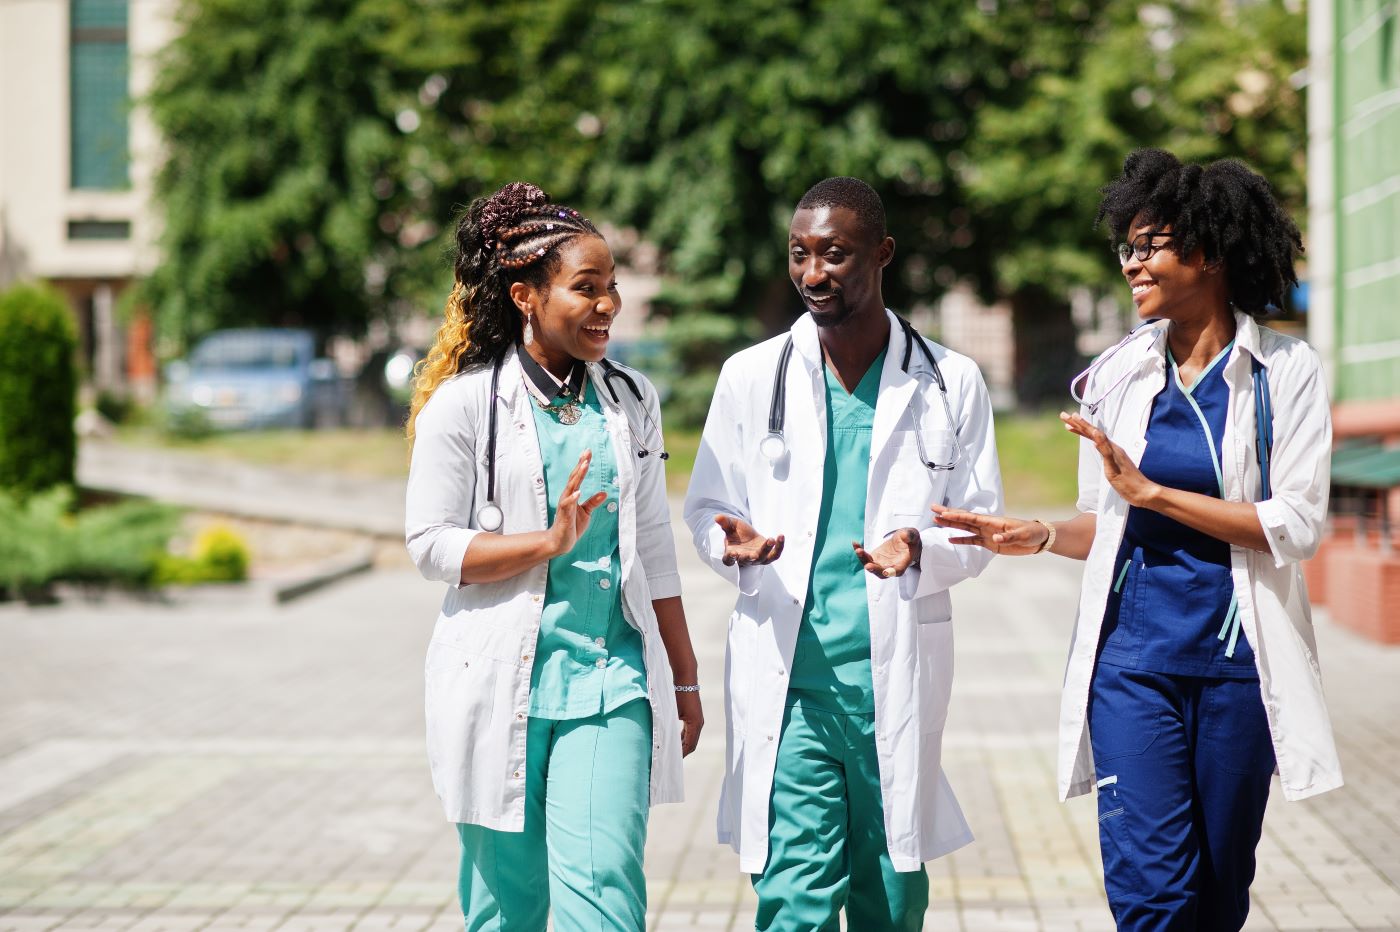 Health care workers walking and talking outside